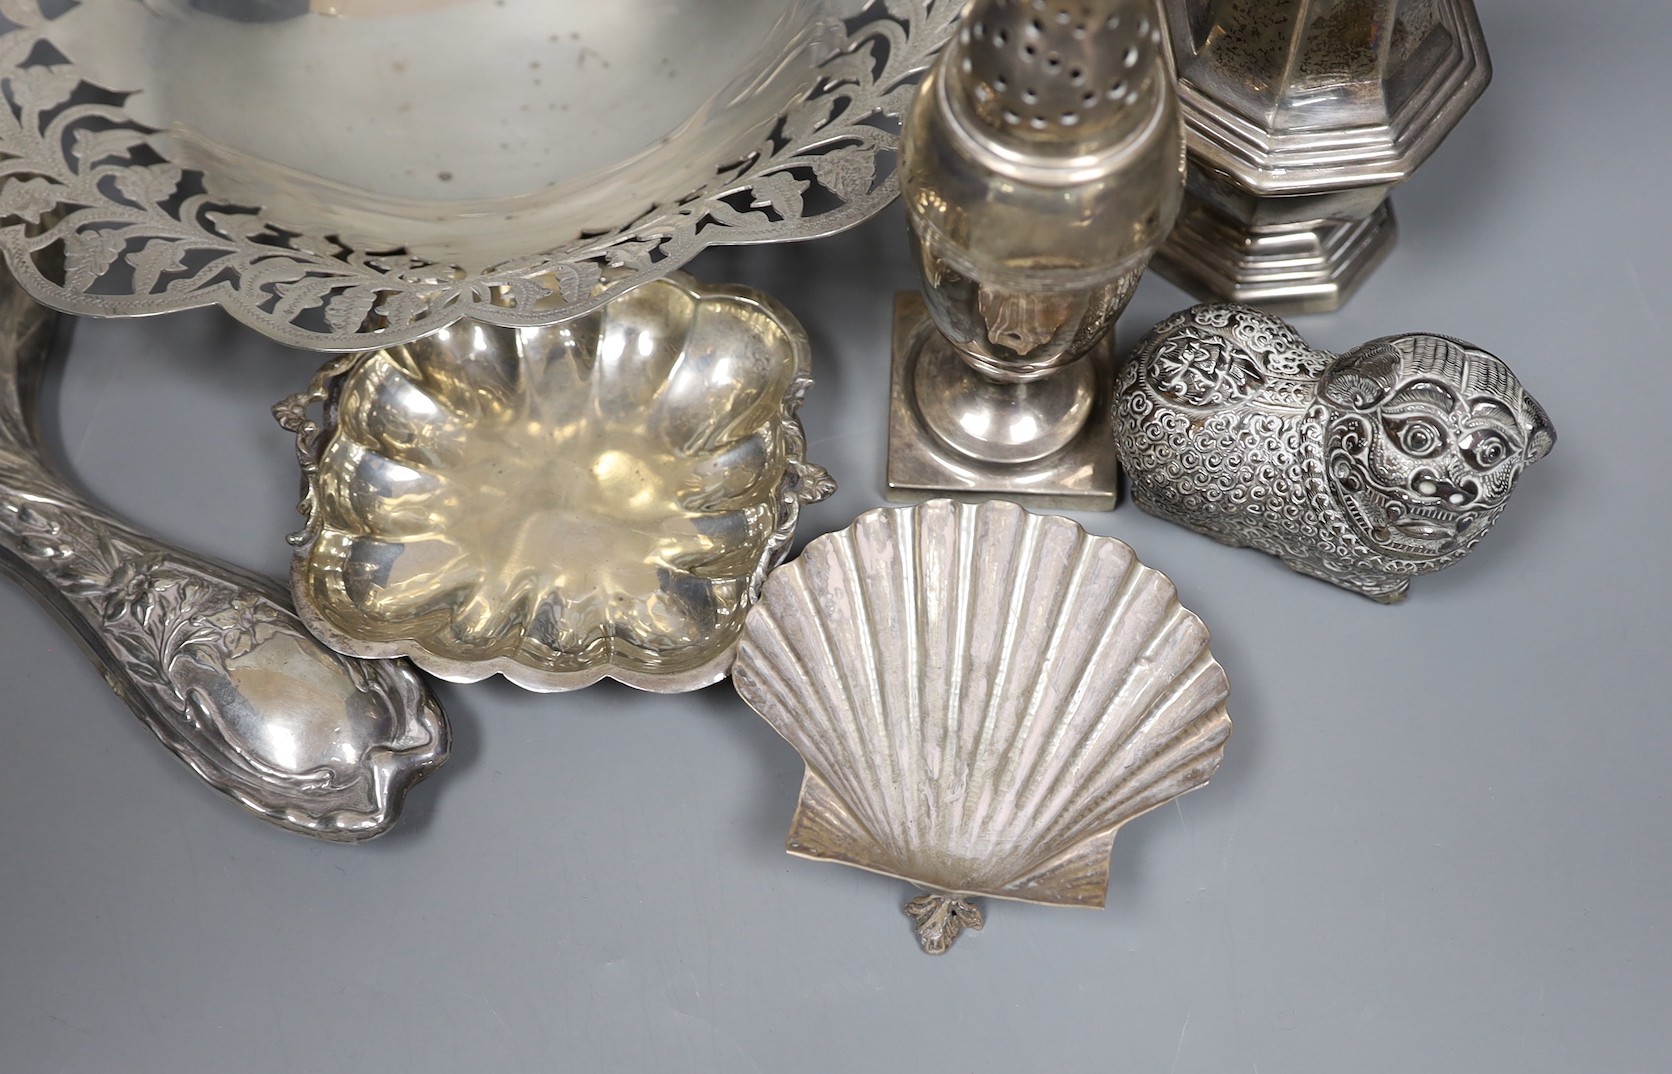 Mixed silver and white metal items including two silver casters, a silver mounted hand mirror, an Egyptian pierced dish, two small dishes and a lion box and cover.